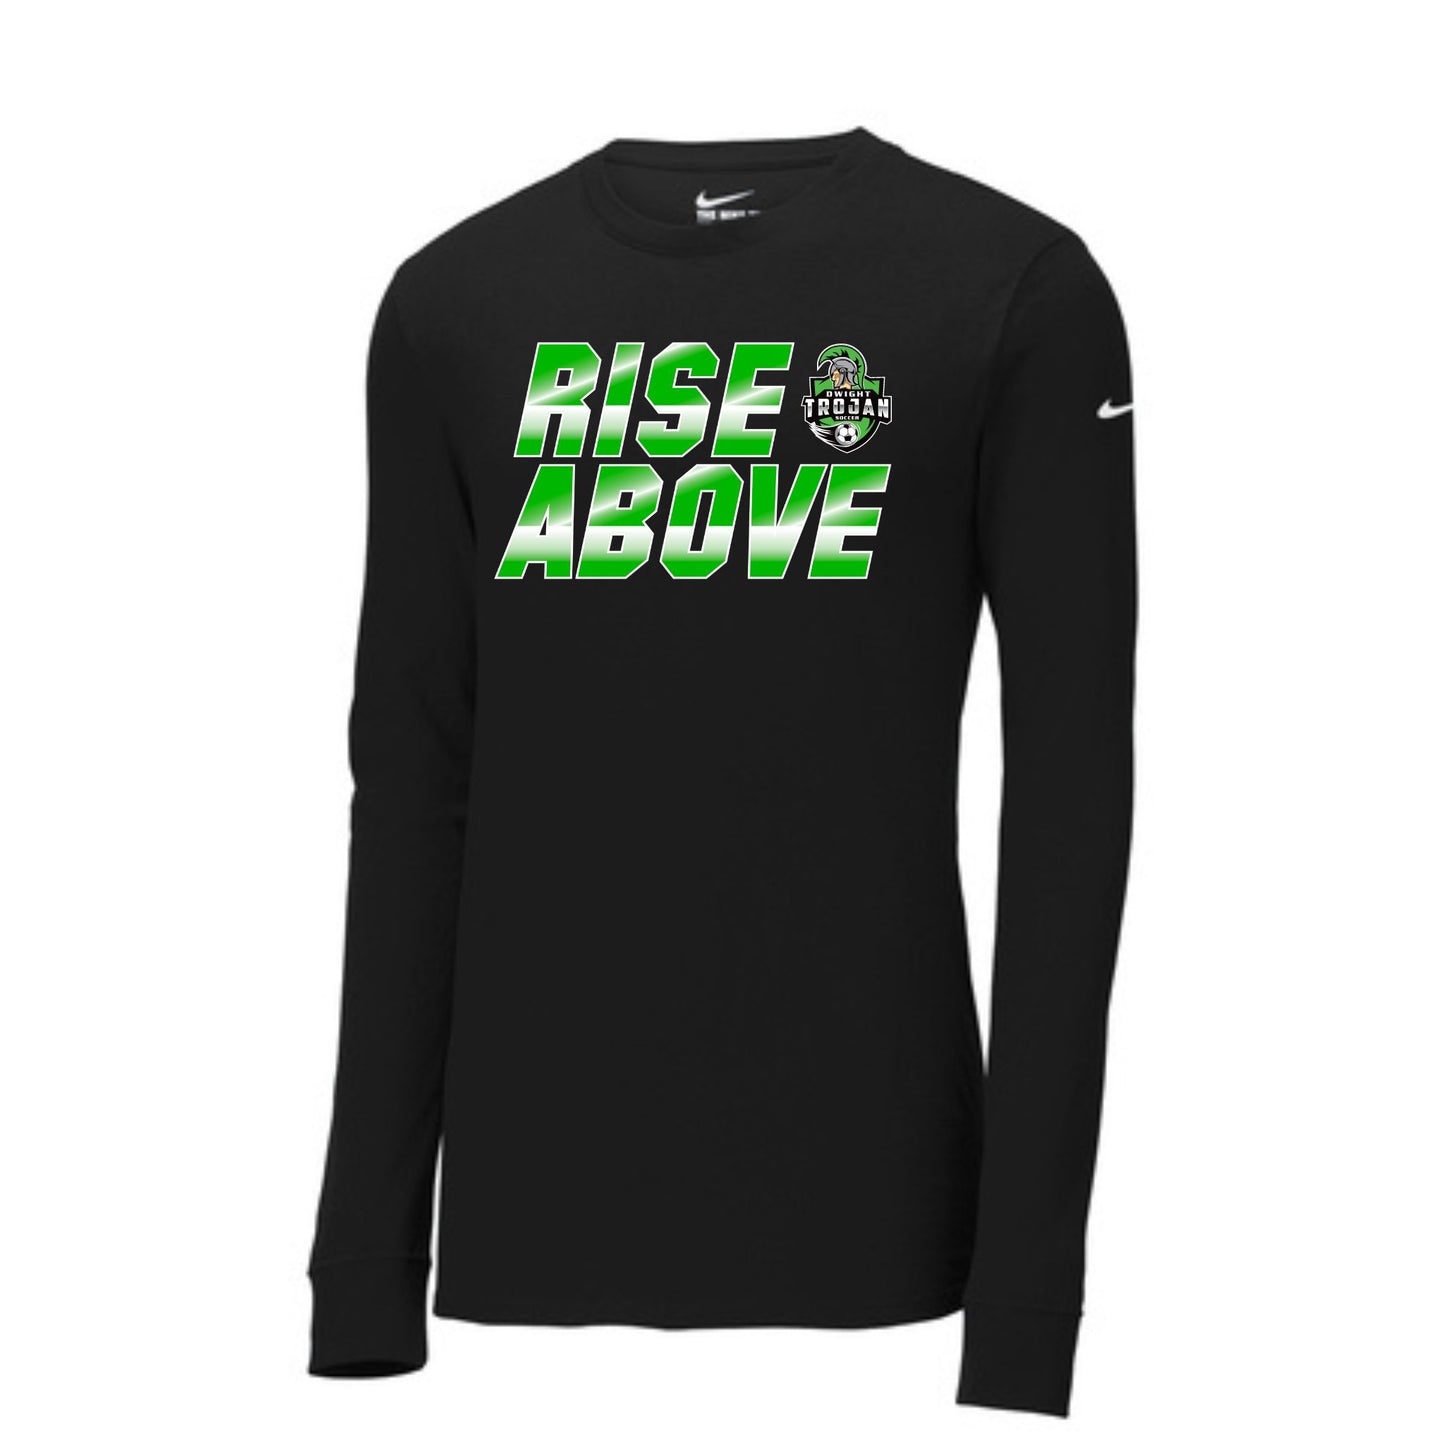 Rise Above - Nike Cotton/Poly Long Sleeve